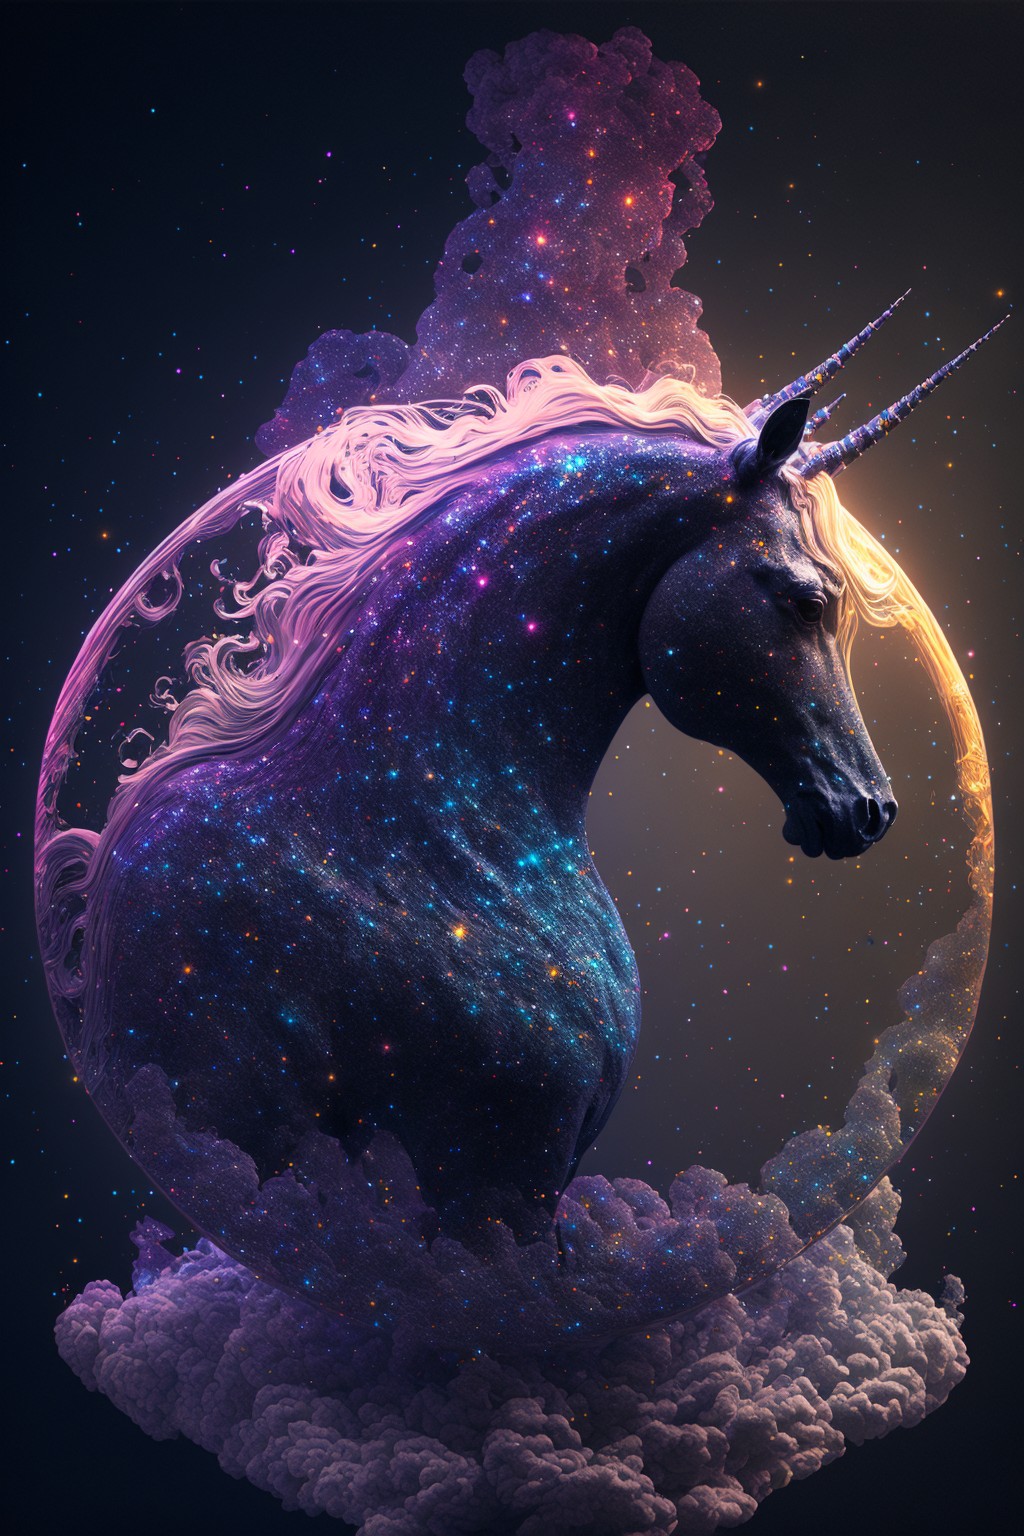 Mysterious unicorn in legend